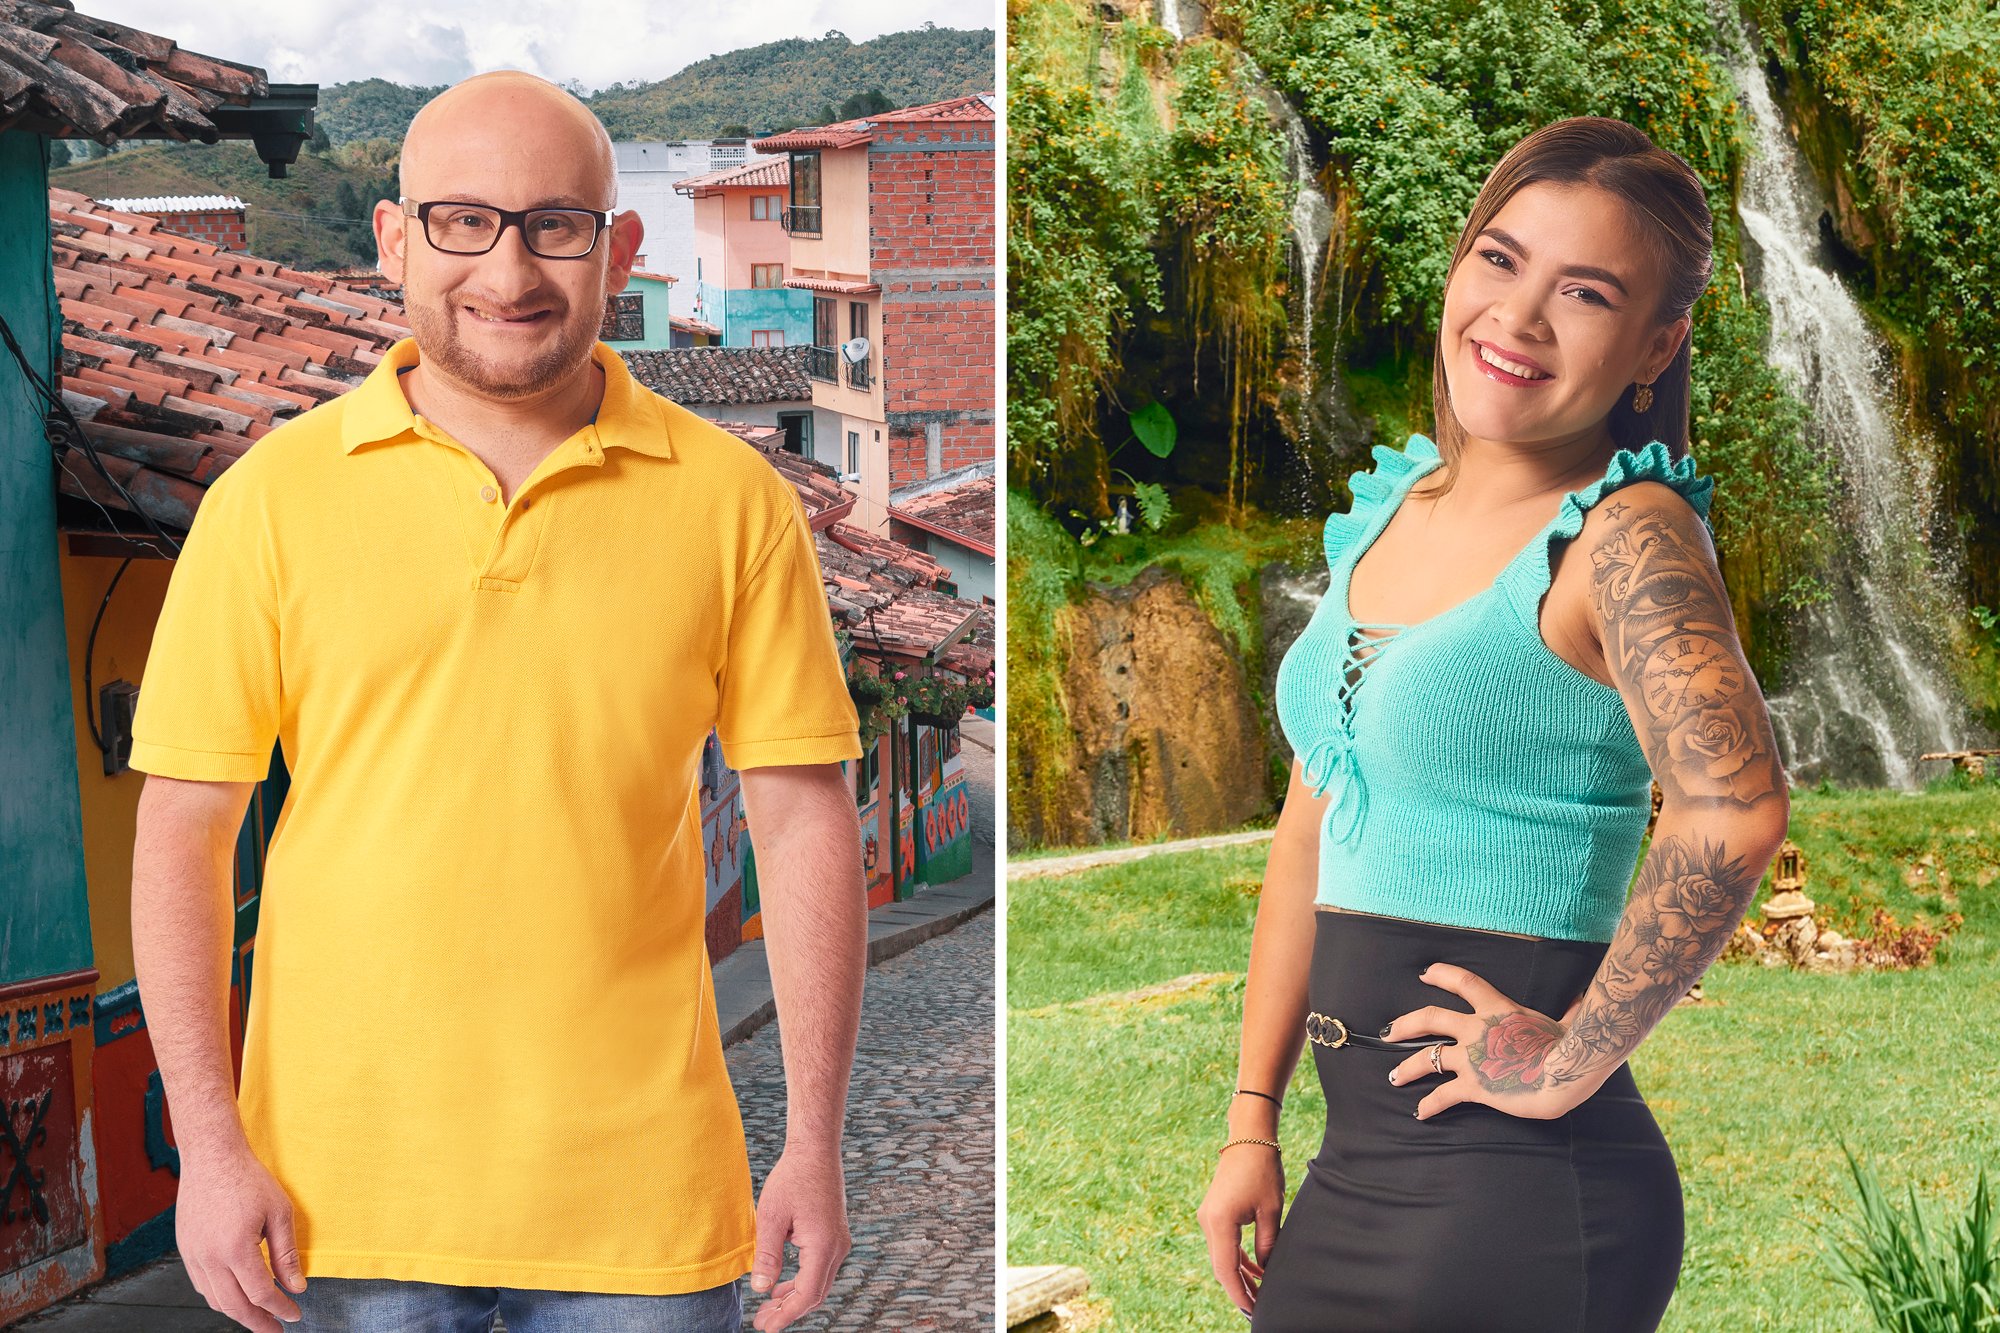 'Before the 90 Days' Season 5 stars Mike and Ximena with Mike wearing a yellow shirt and Ximena in a teal tank top.